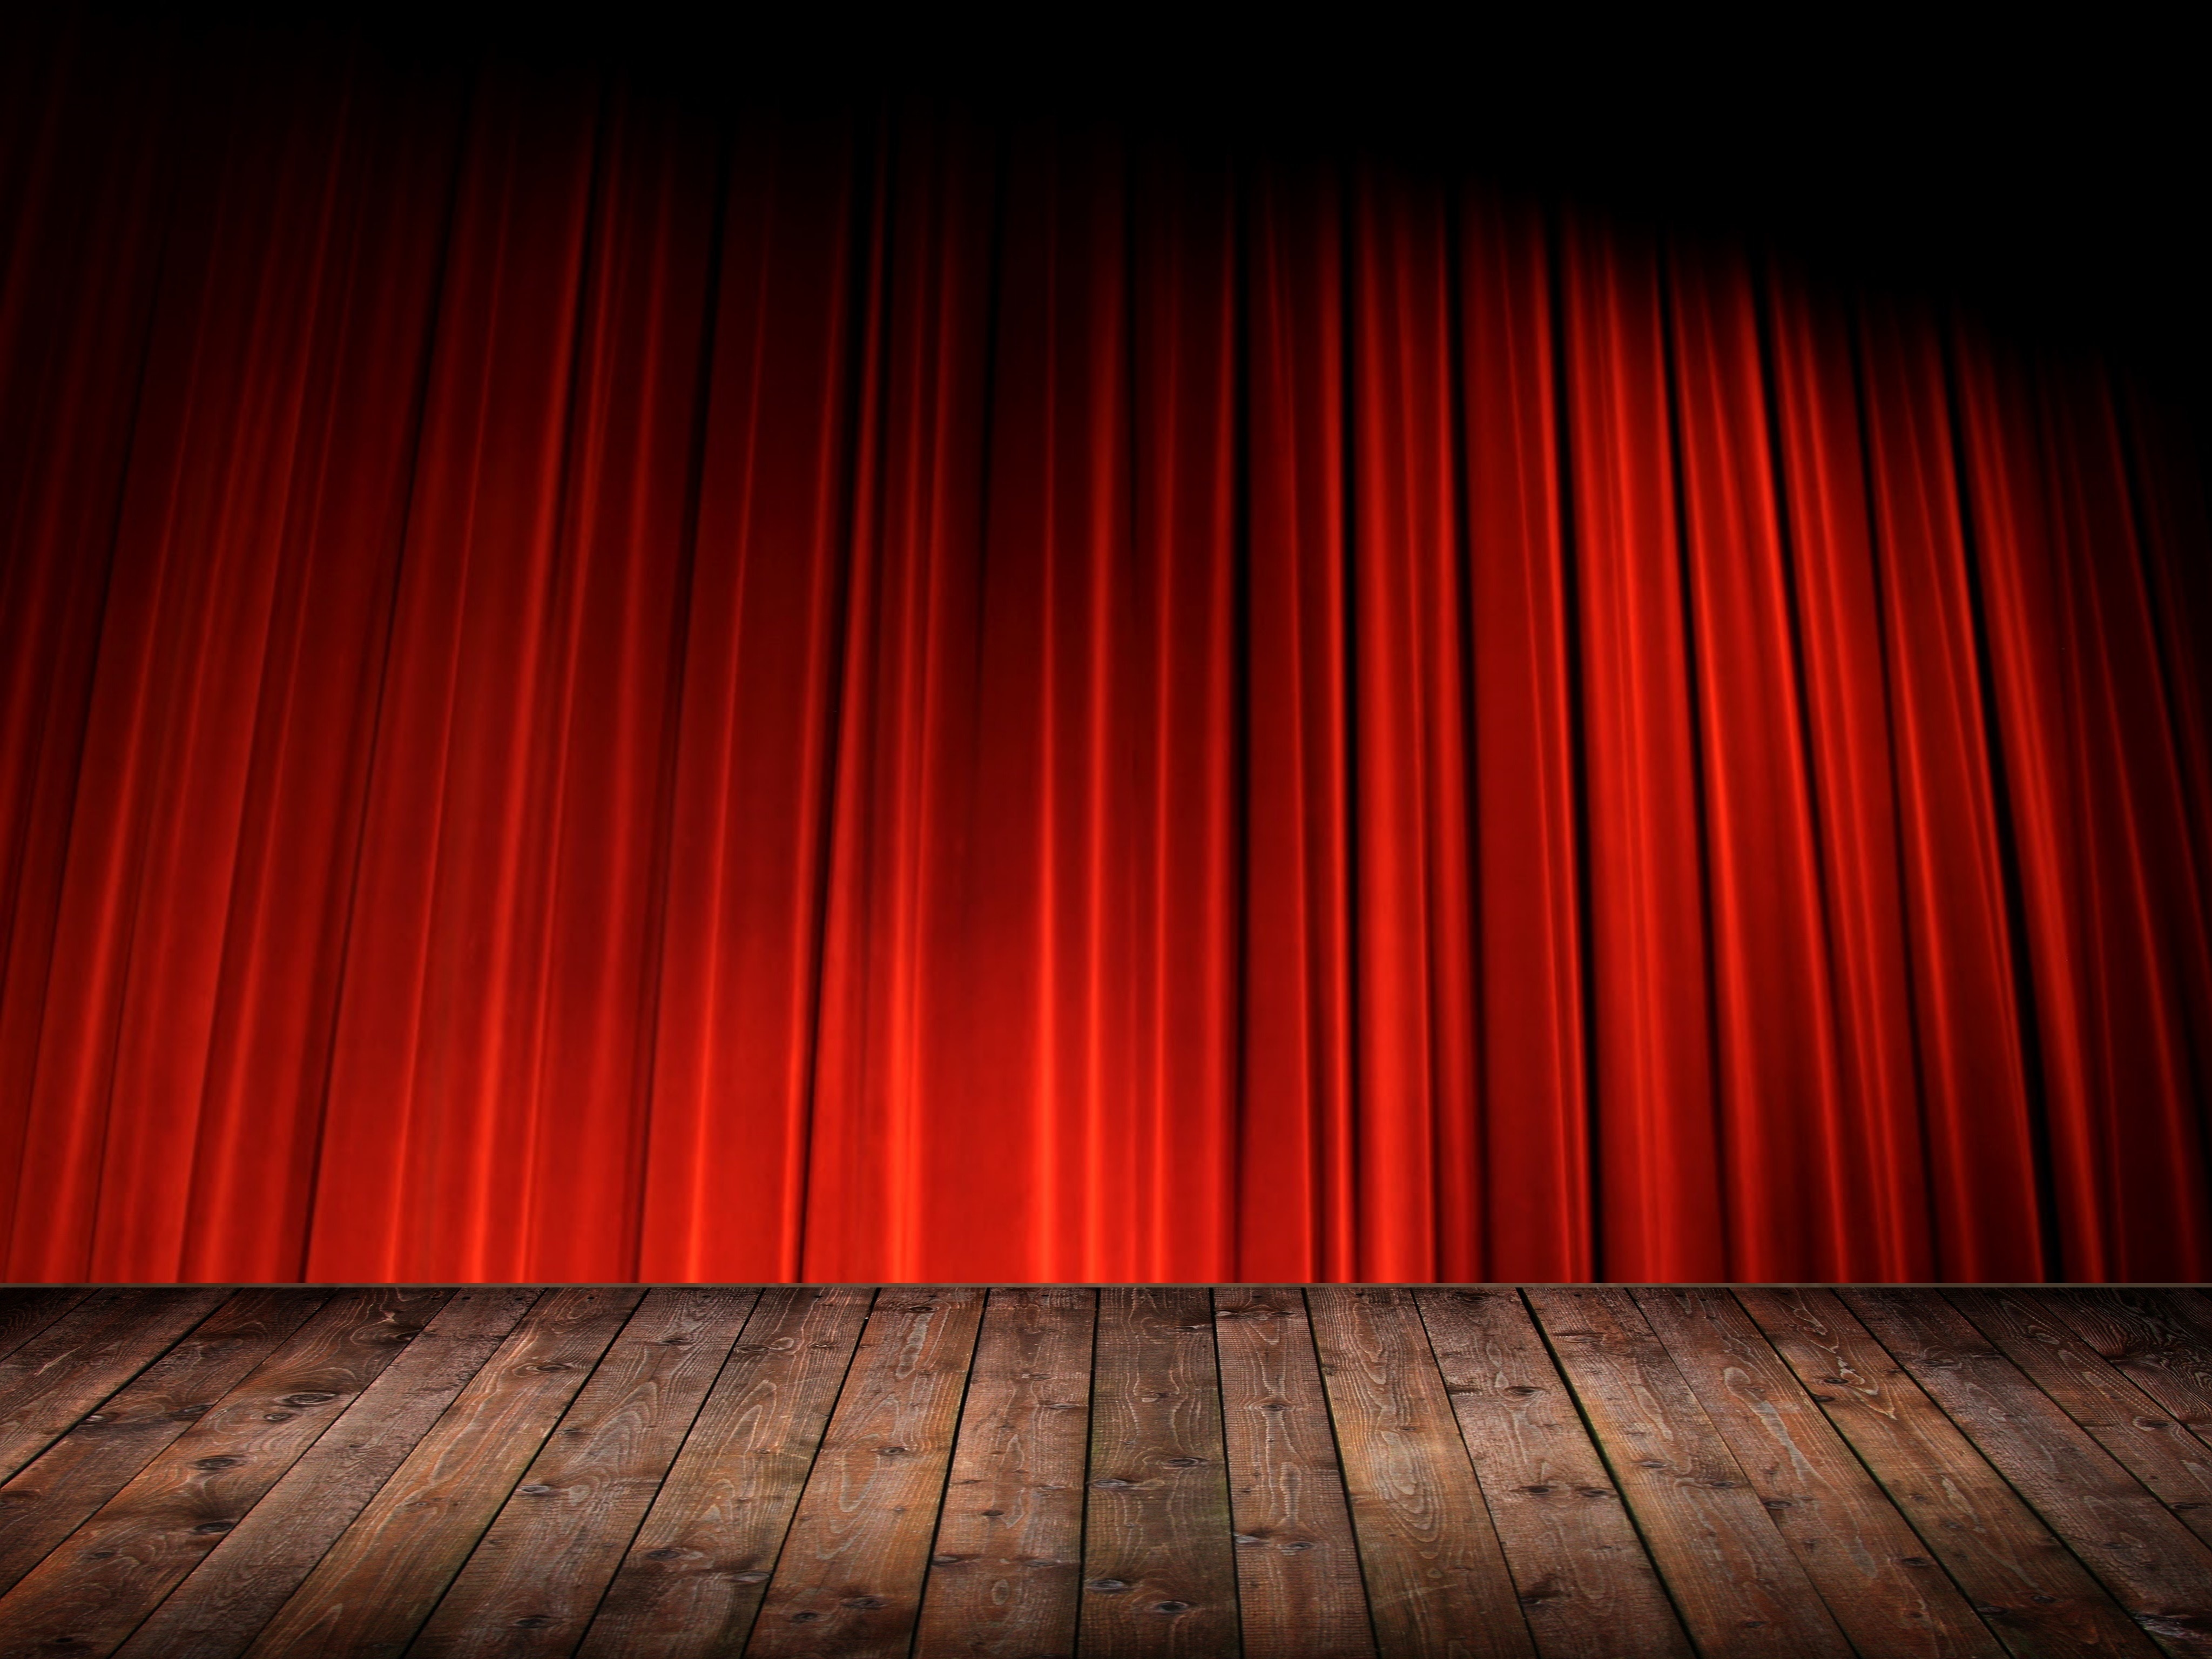 Casino, Las Vegas, Theatre, Curtain, Red, curtain, stage - performance space